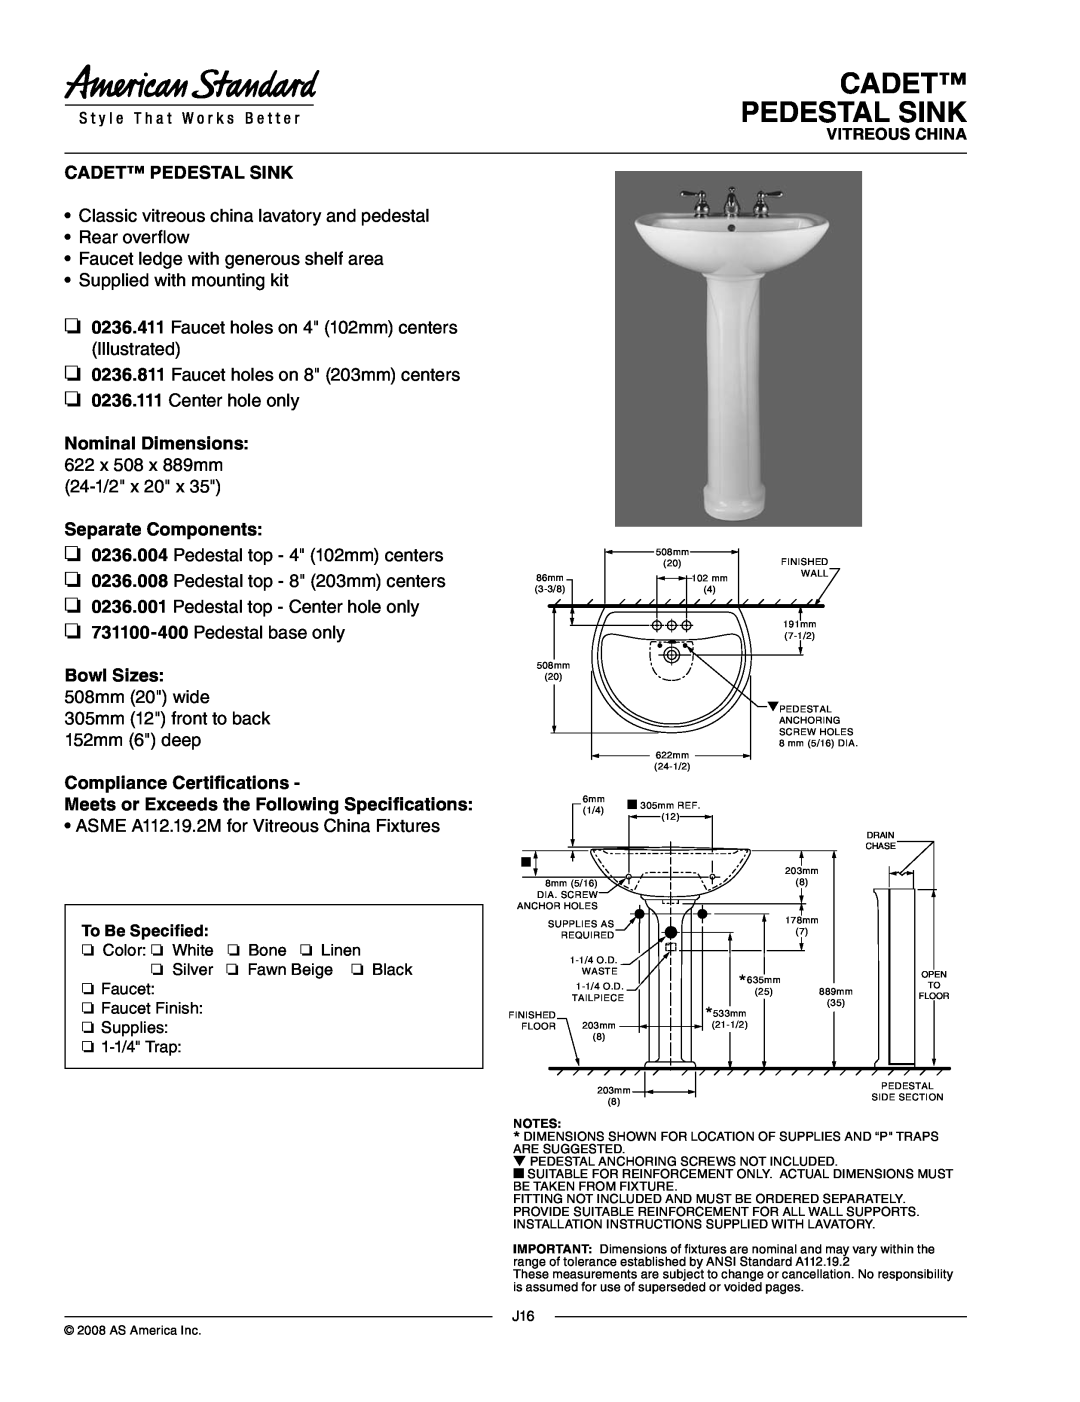 American Standard 0236.008, 0236.111 dimensions Cadet Pedestal Sink, Separate Components, Compliance Certifications 